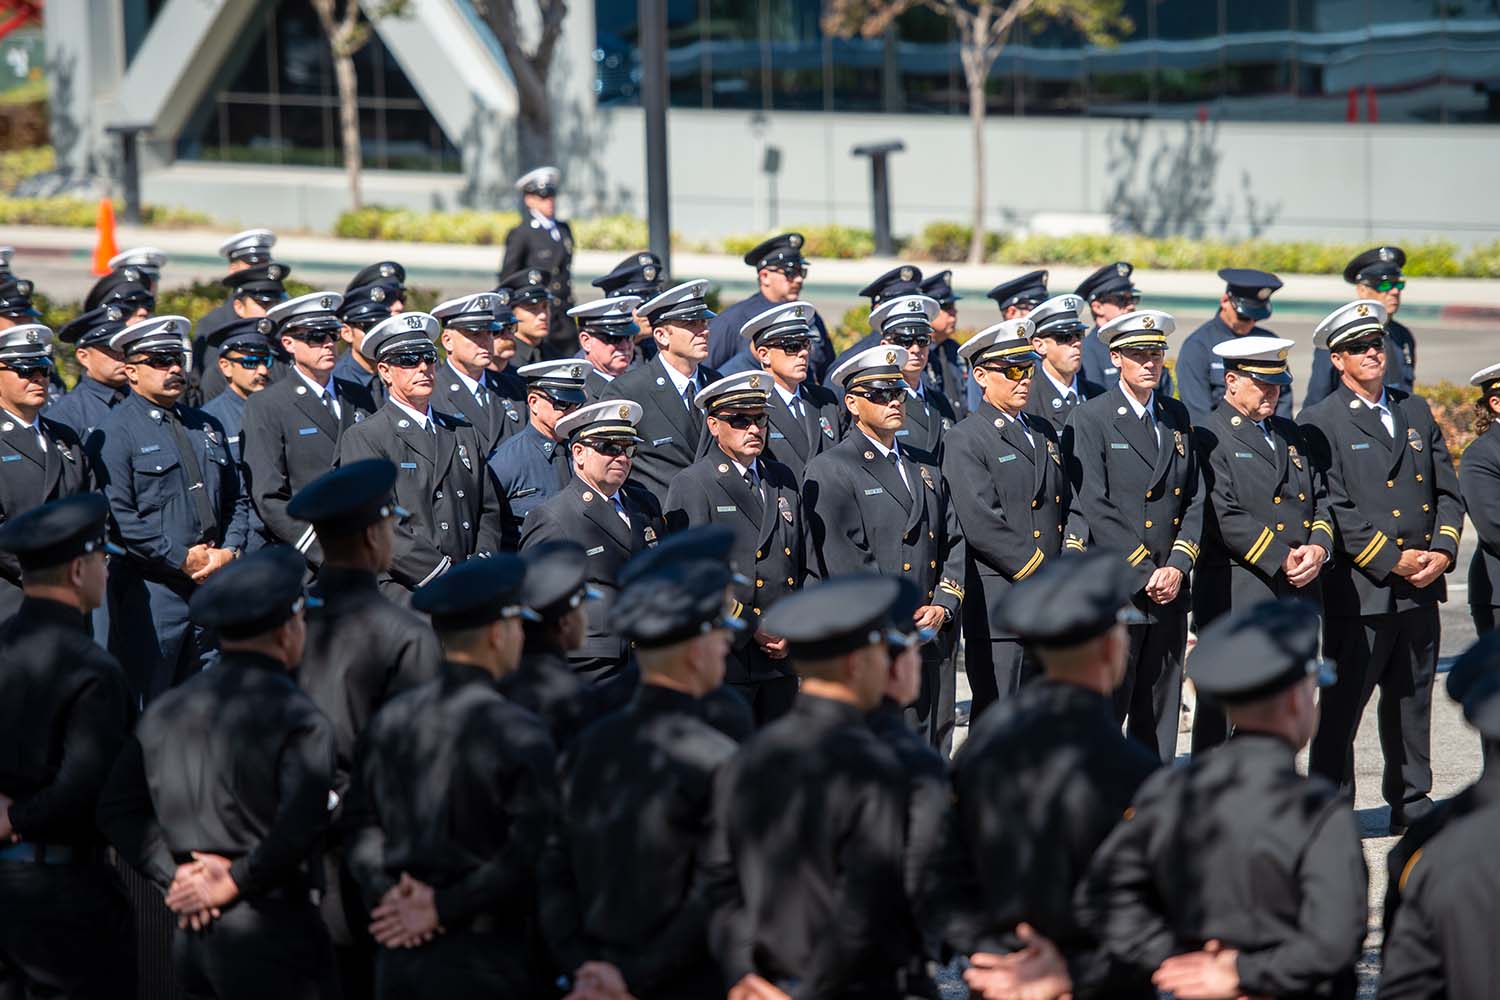 LACoFD Hosts the 2022 Firefighters’ Memorial Service